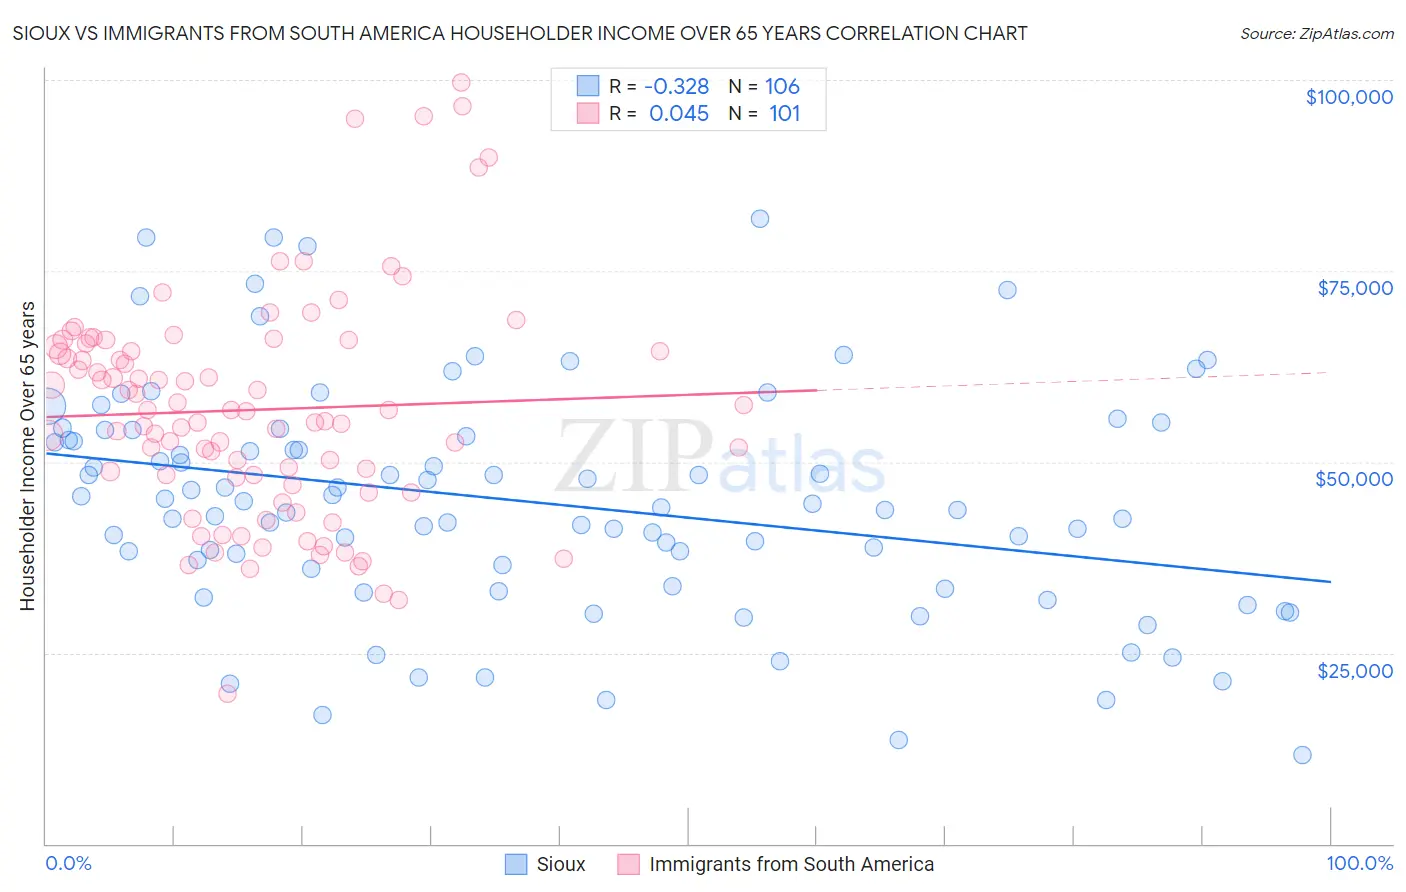 Sioux vs Immigrants from South America Householder Income Over 65 years